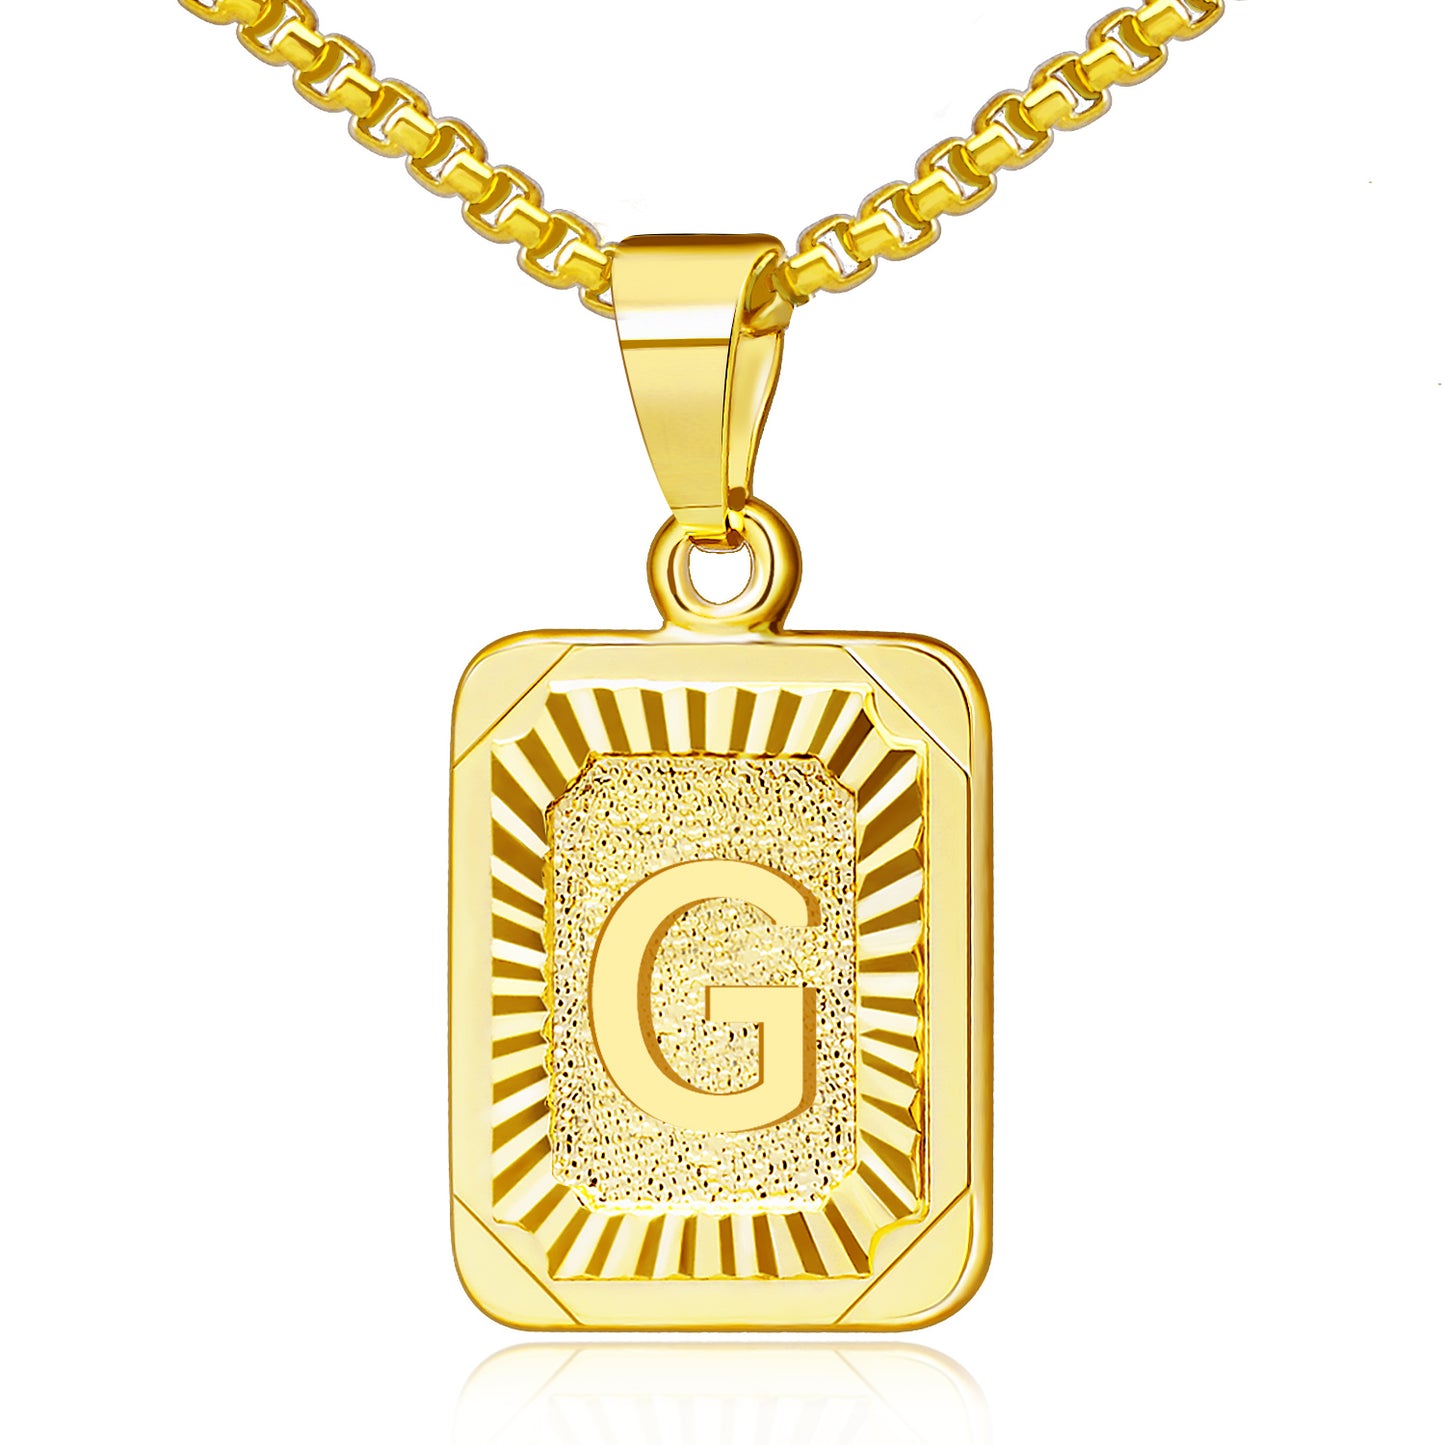 Large Letter Pendant Yellow Gold / One Size / G